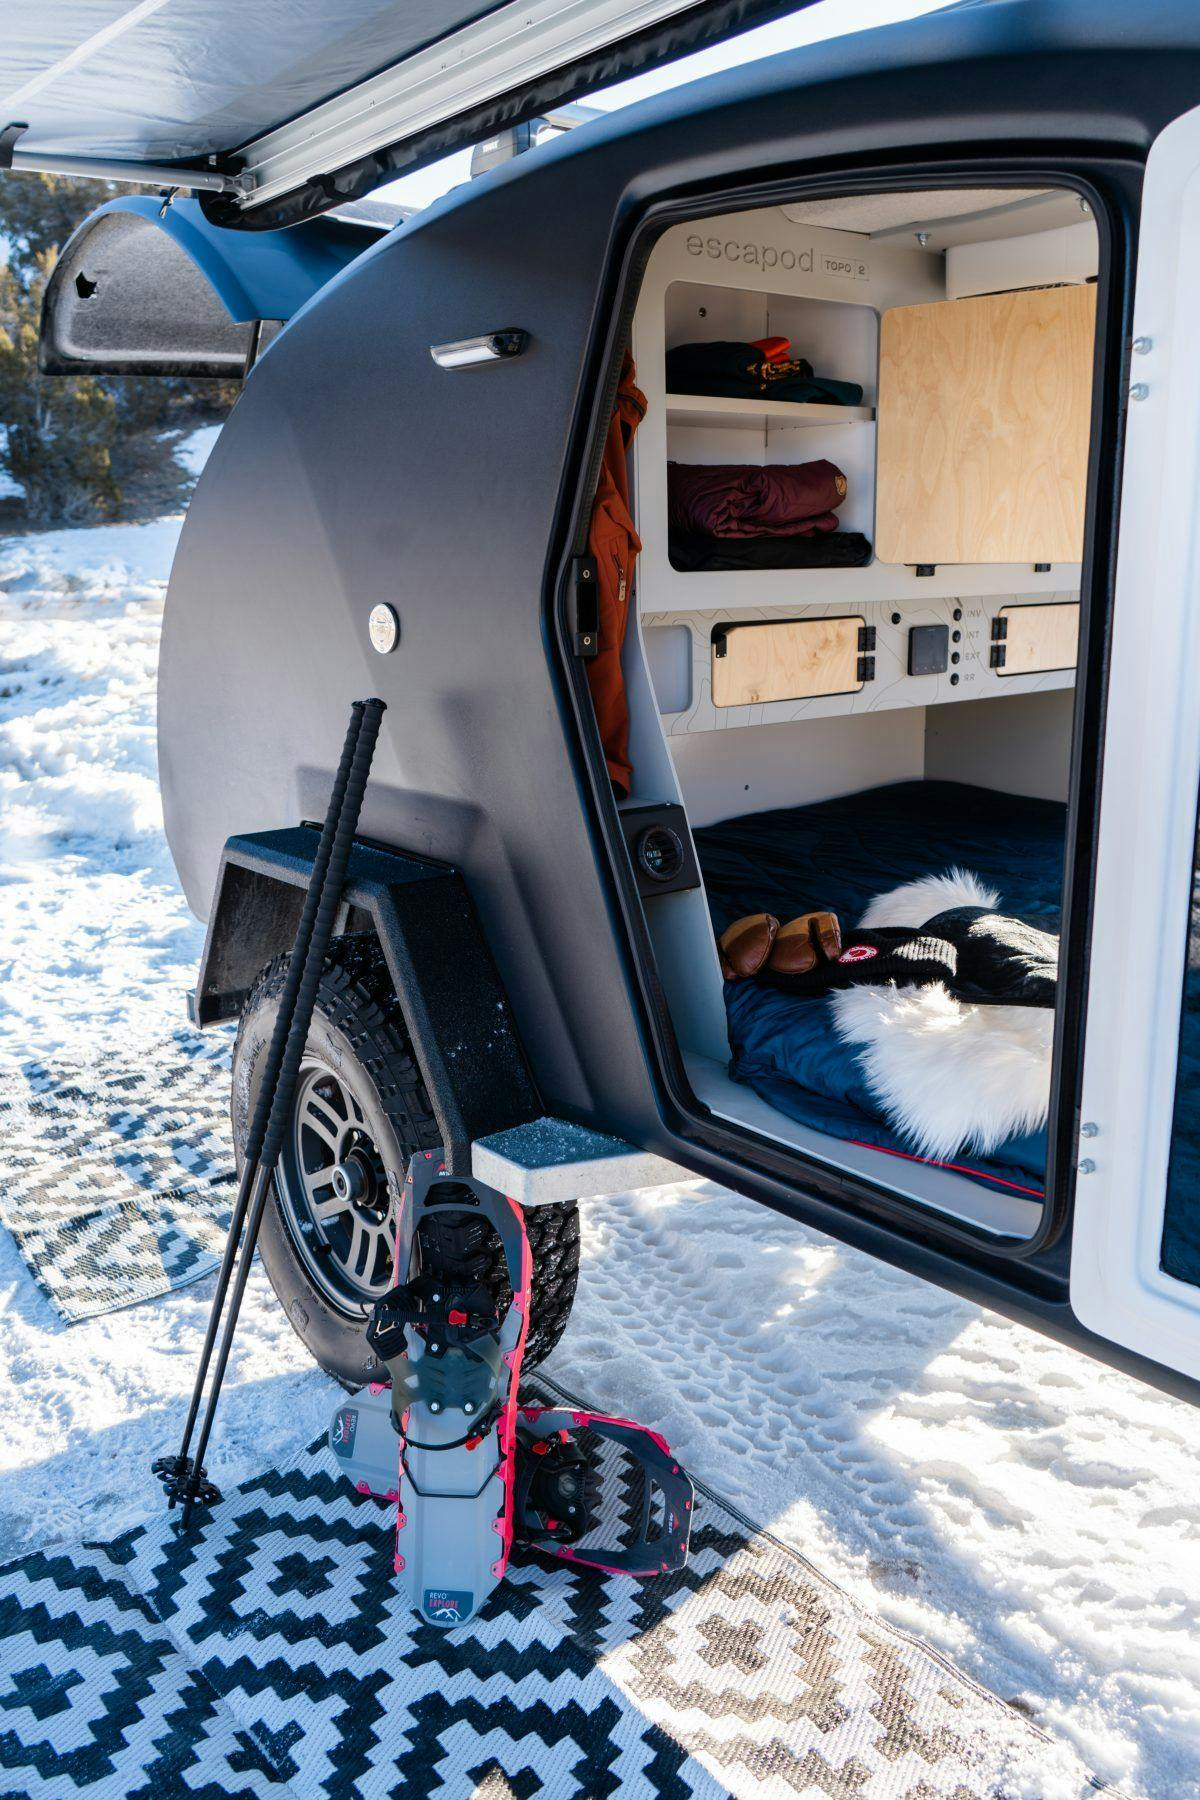 A teardrop camper parked outside in the snow, with snowshoeing gear rested alongside it.